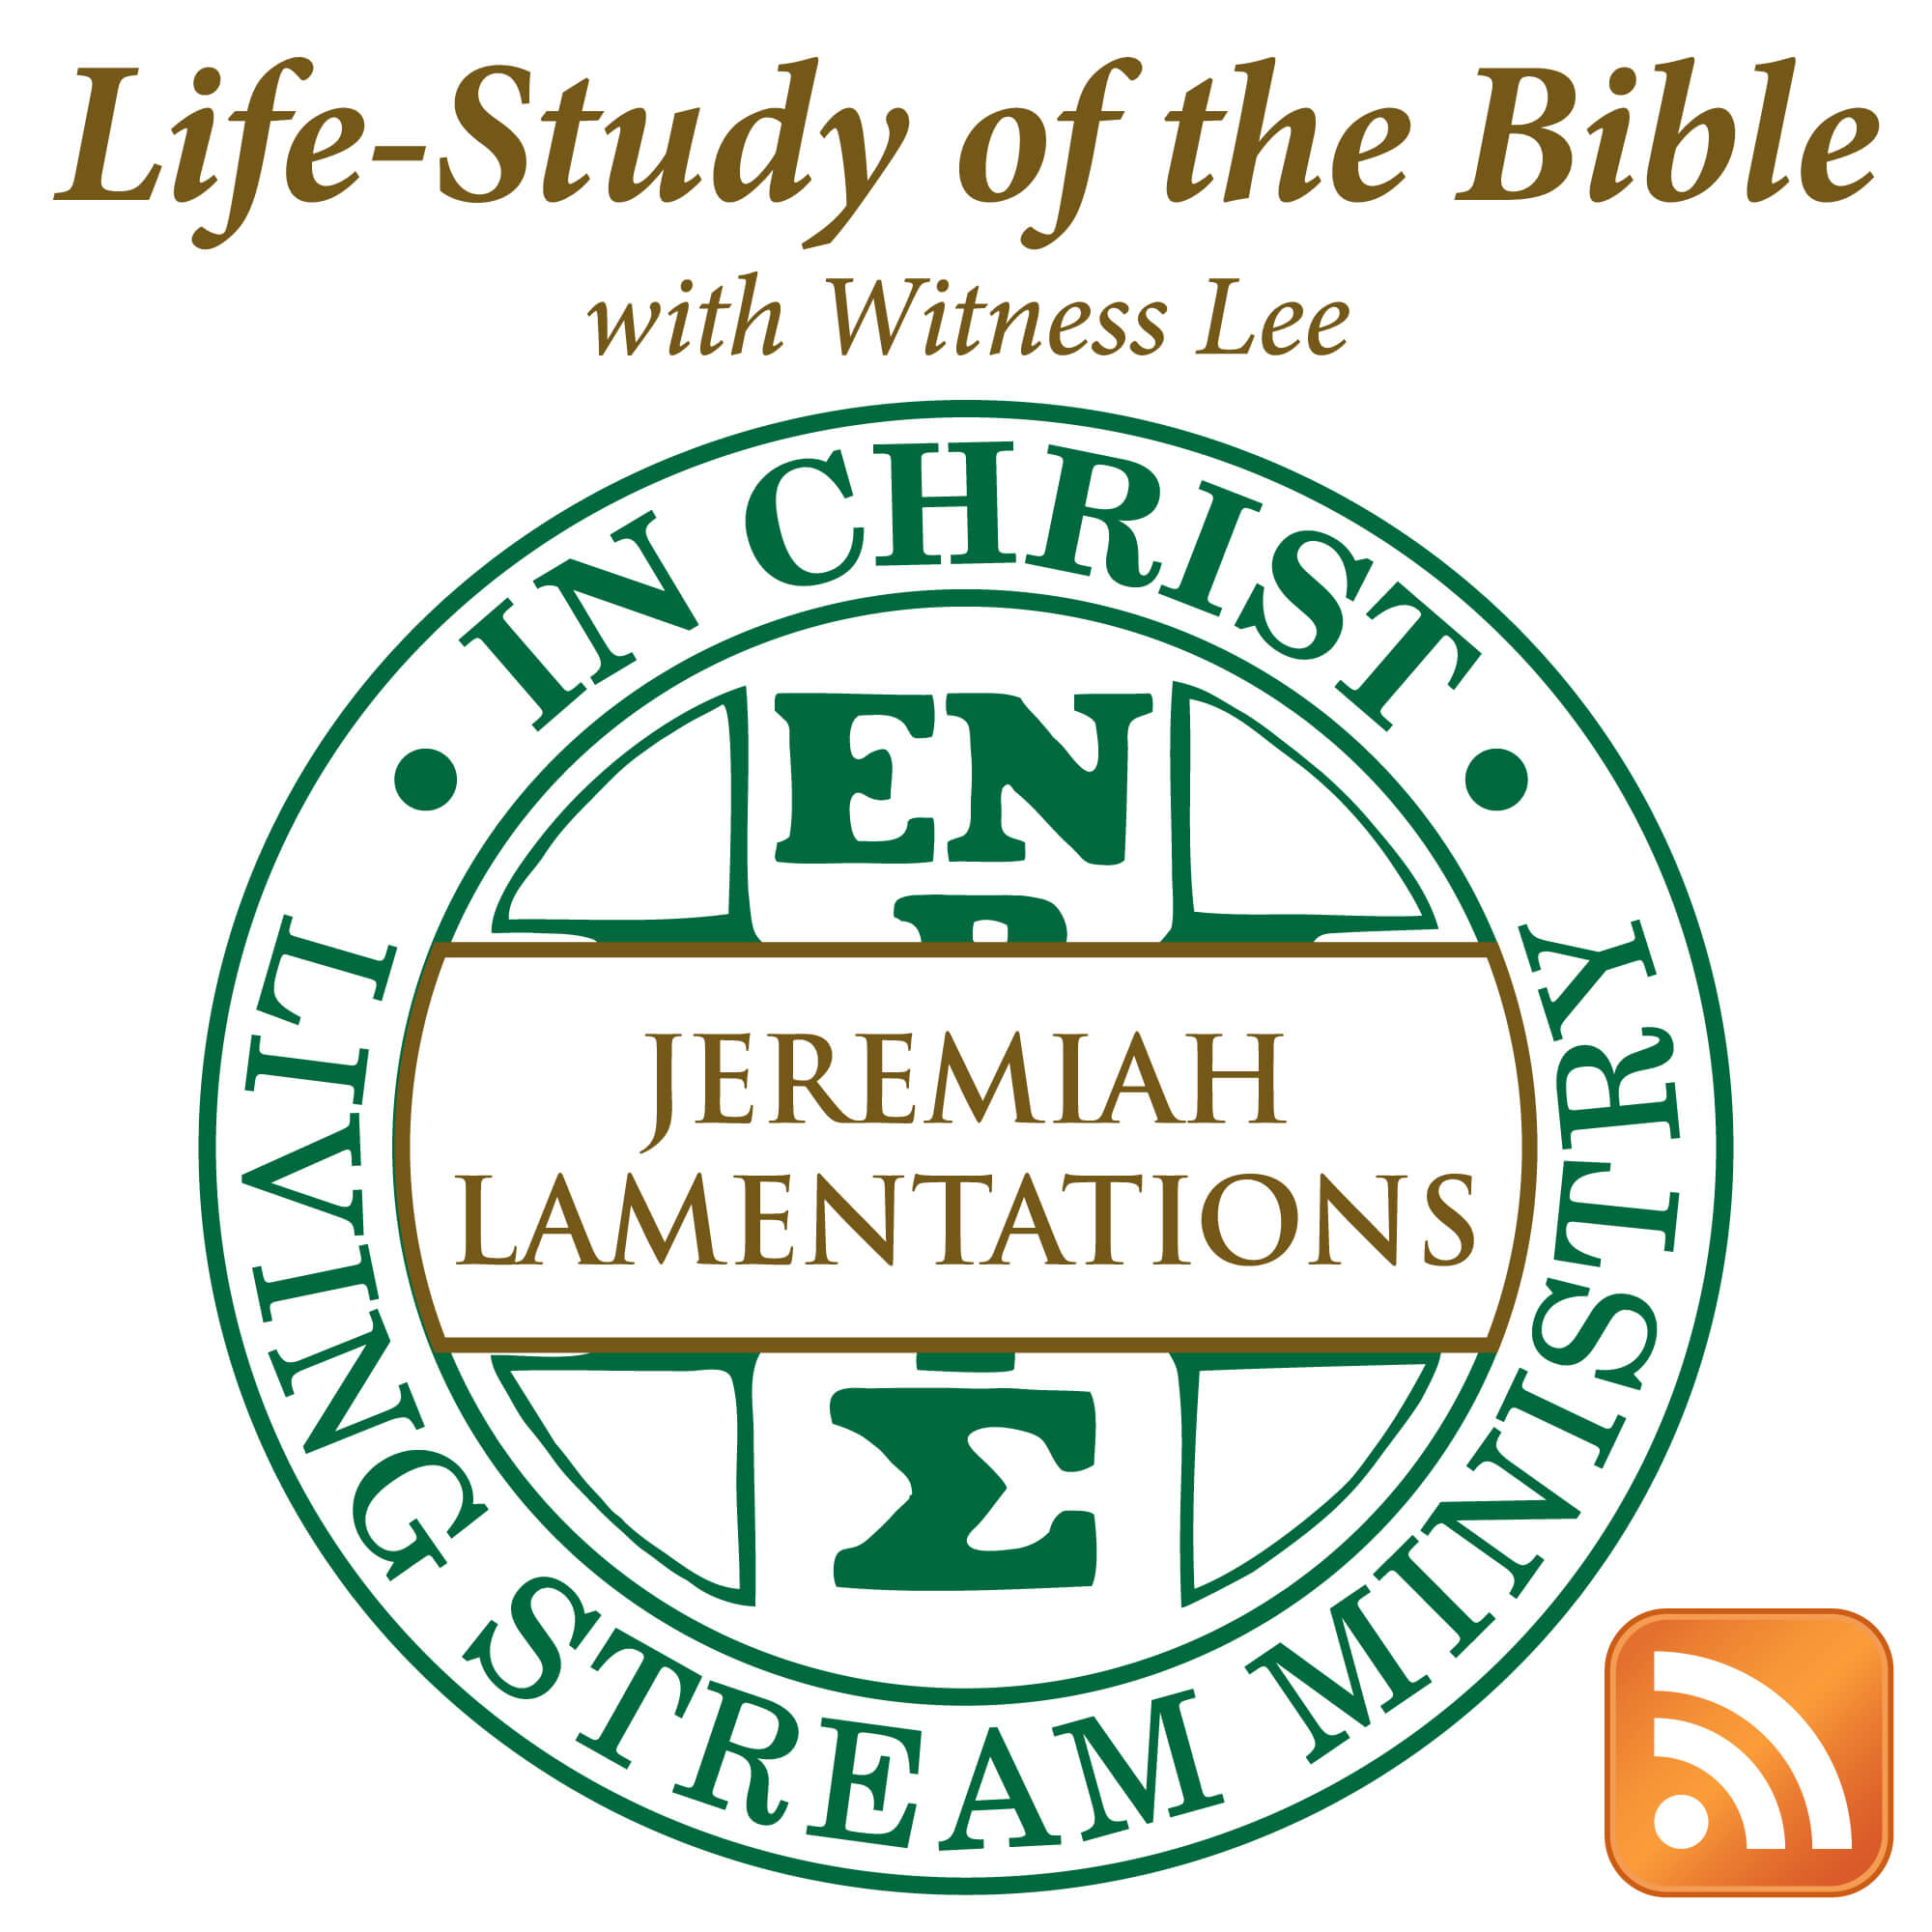 Life-Study of Jeremiah & Lamentations with Witness Lee